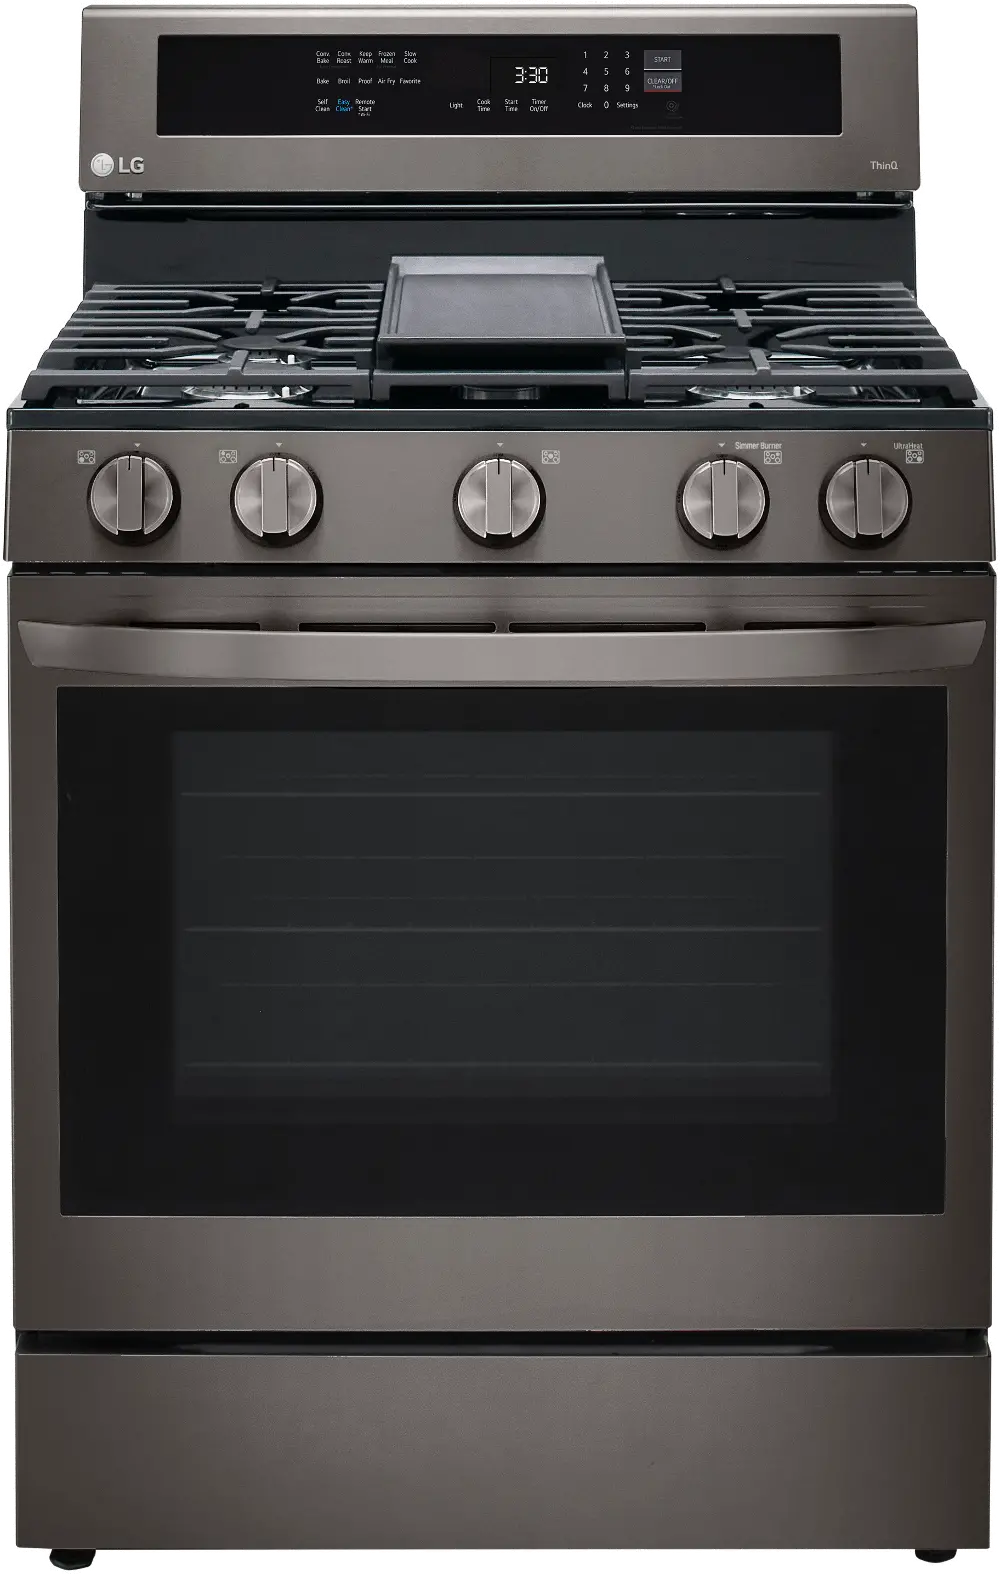 LRGL5825D LG 5.8 cu ft Gas Range with InstaView - Black Stainless Steel-1